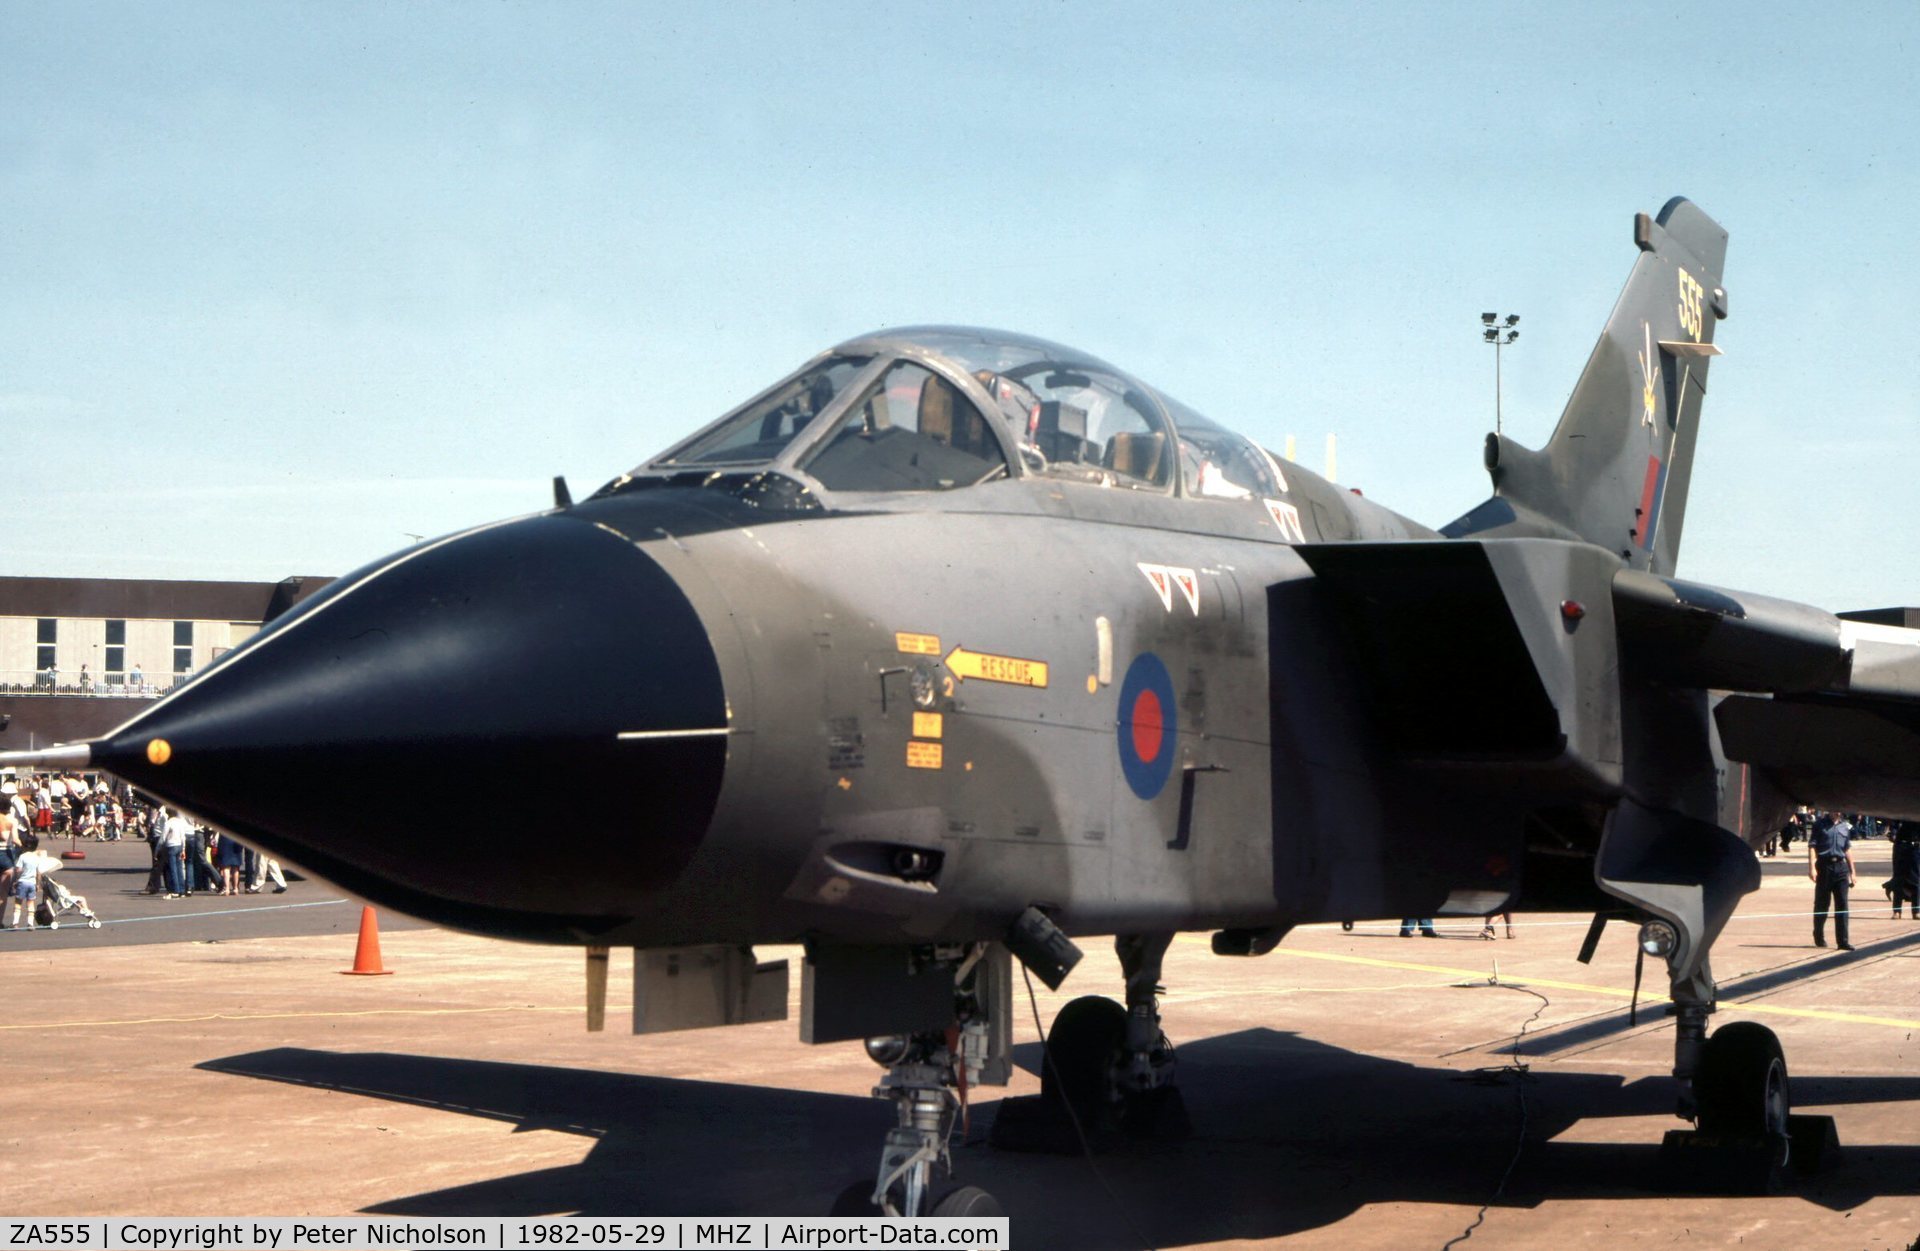 ZA555, 1981 Panavia Tornado GR.1 C/N 074/BT020/3039, Tornado GR.1 of the Tactical Weapons Conversion Unit on display at the 1982 RAF Mildenhall Air Fete.